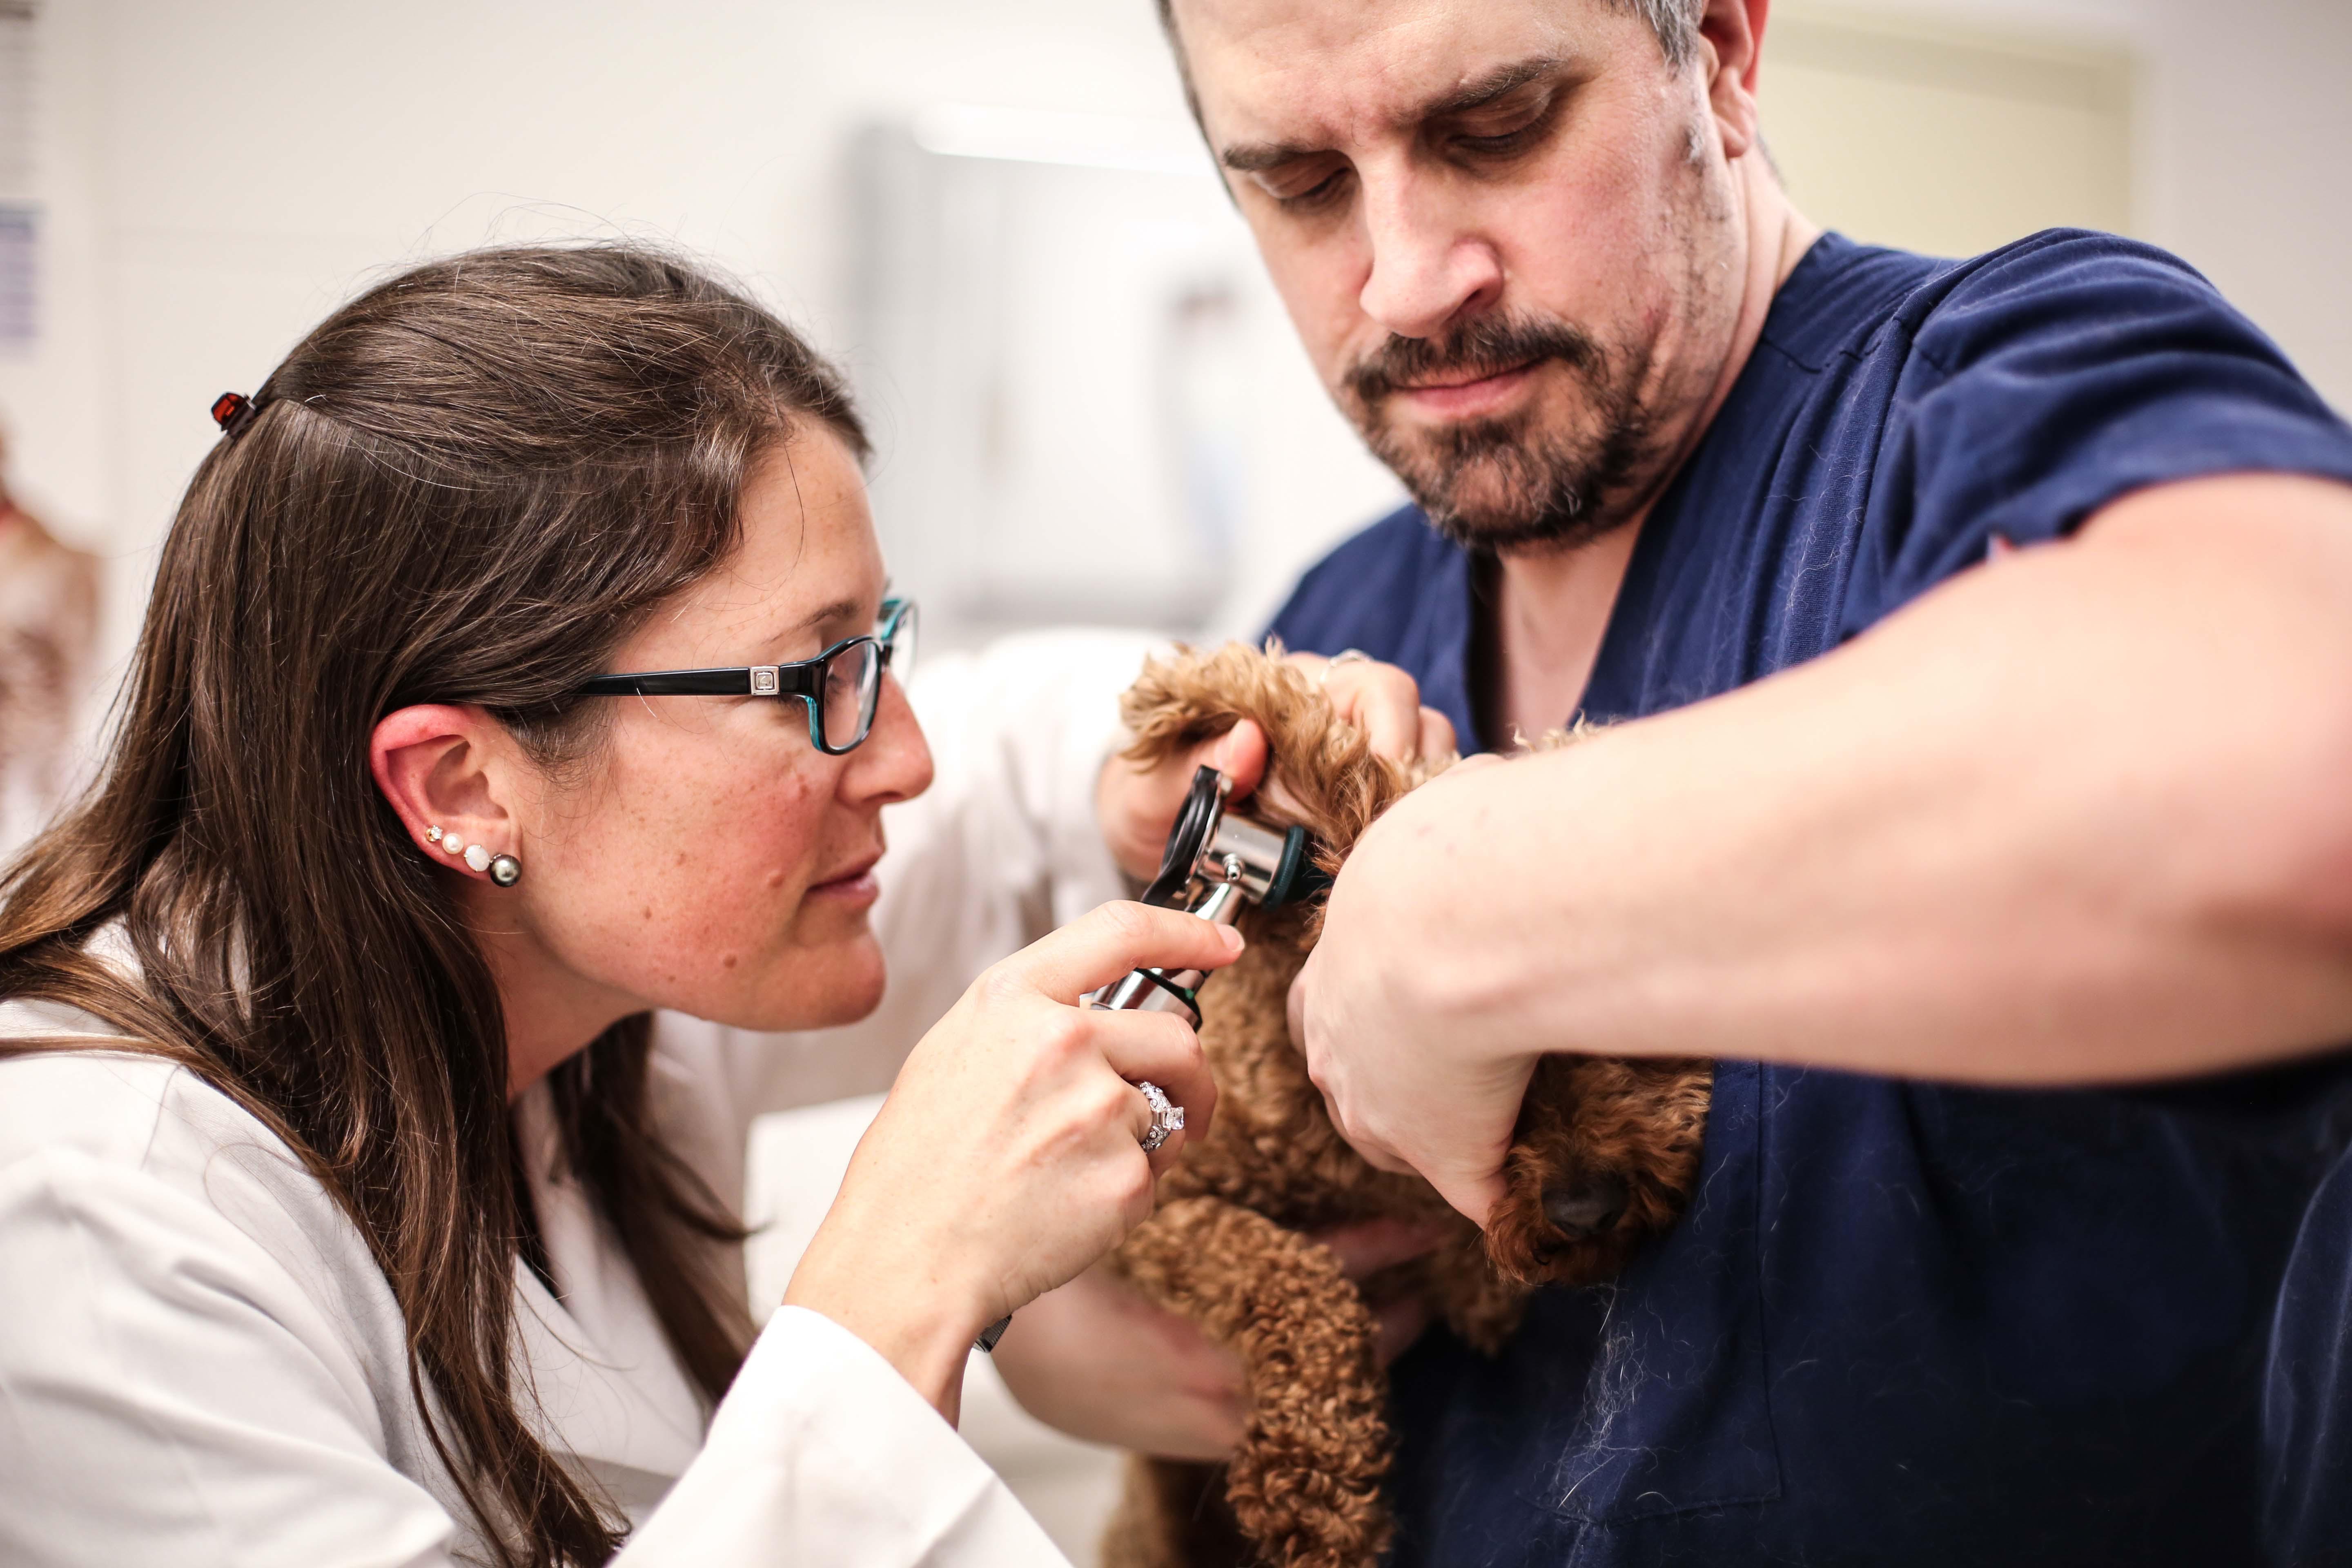 If you notice signs like head shaking, odor, and scratching and rubbing at the ears, your pet may have an ear infection. Call us so we can provide your pet with relief!